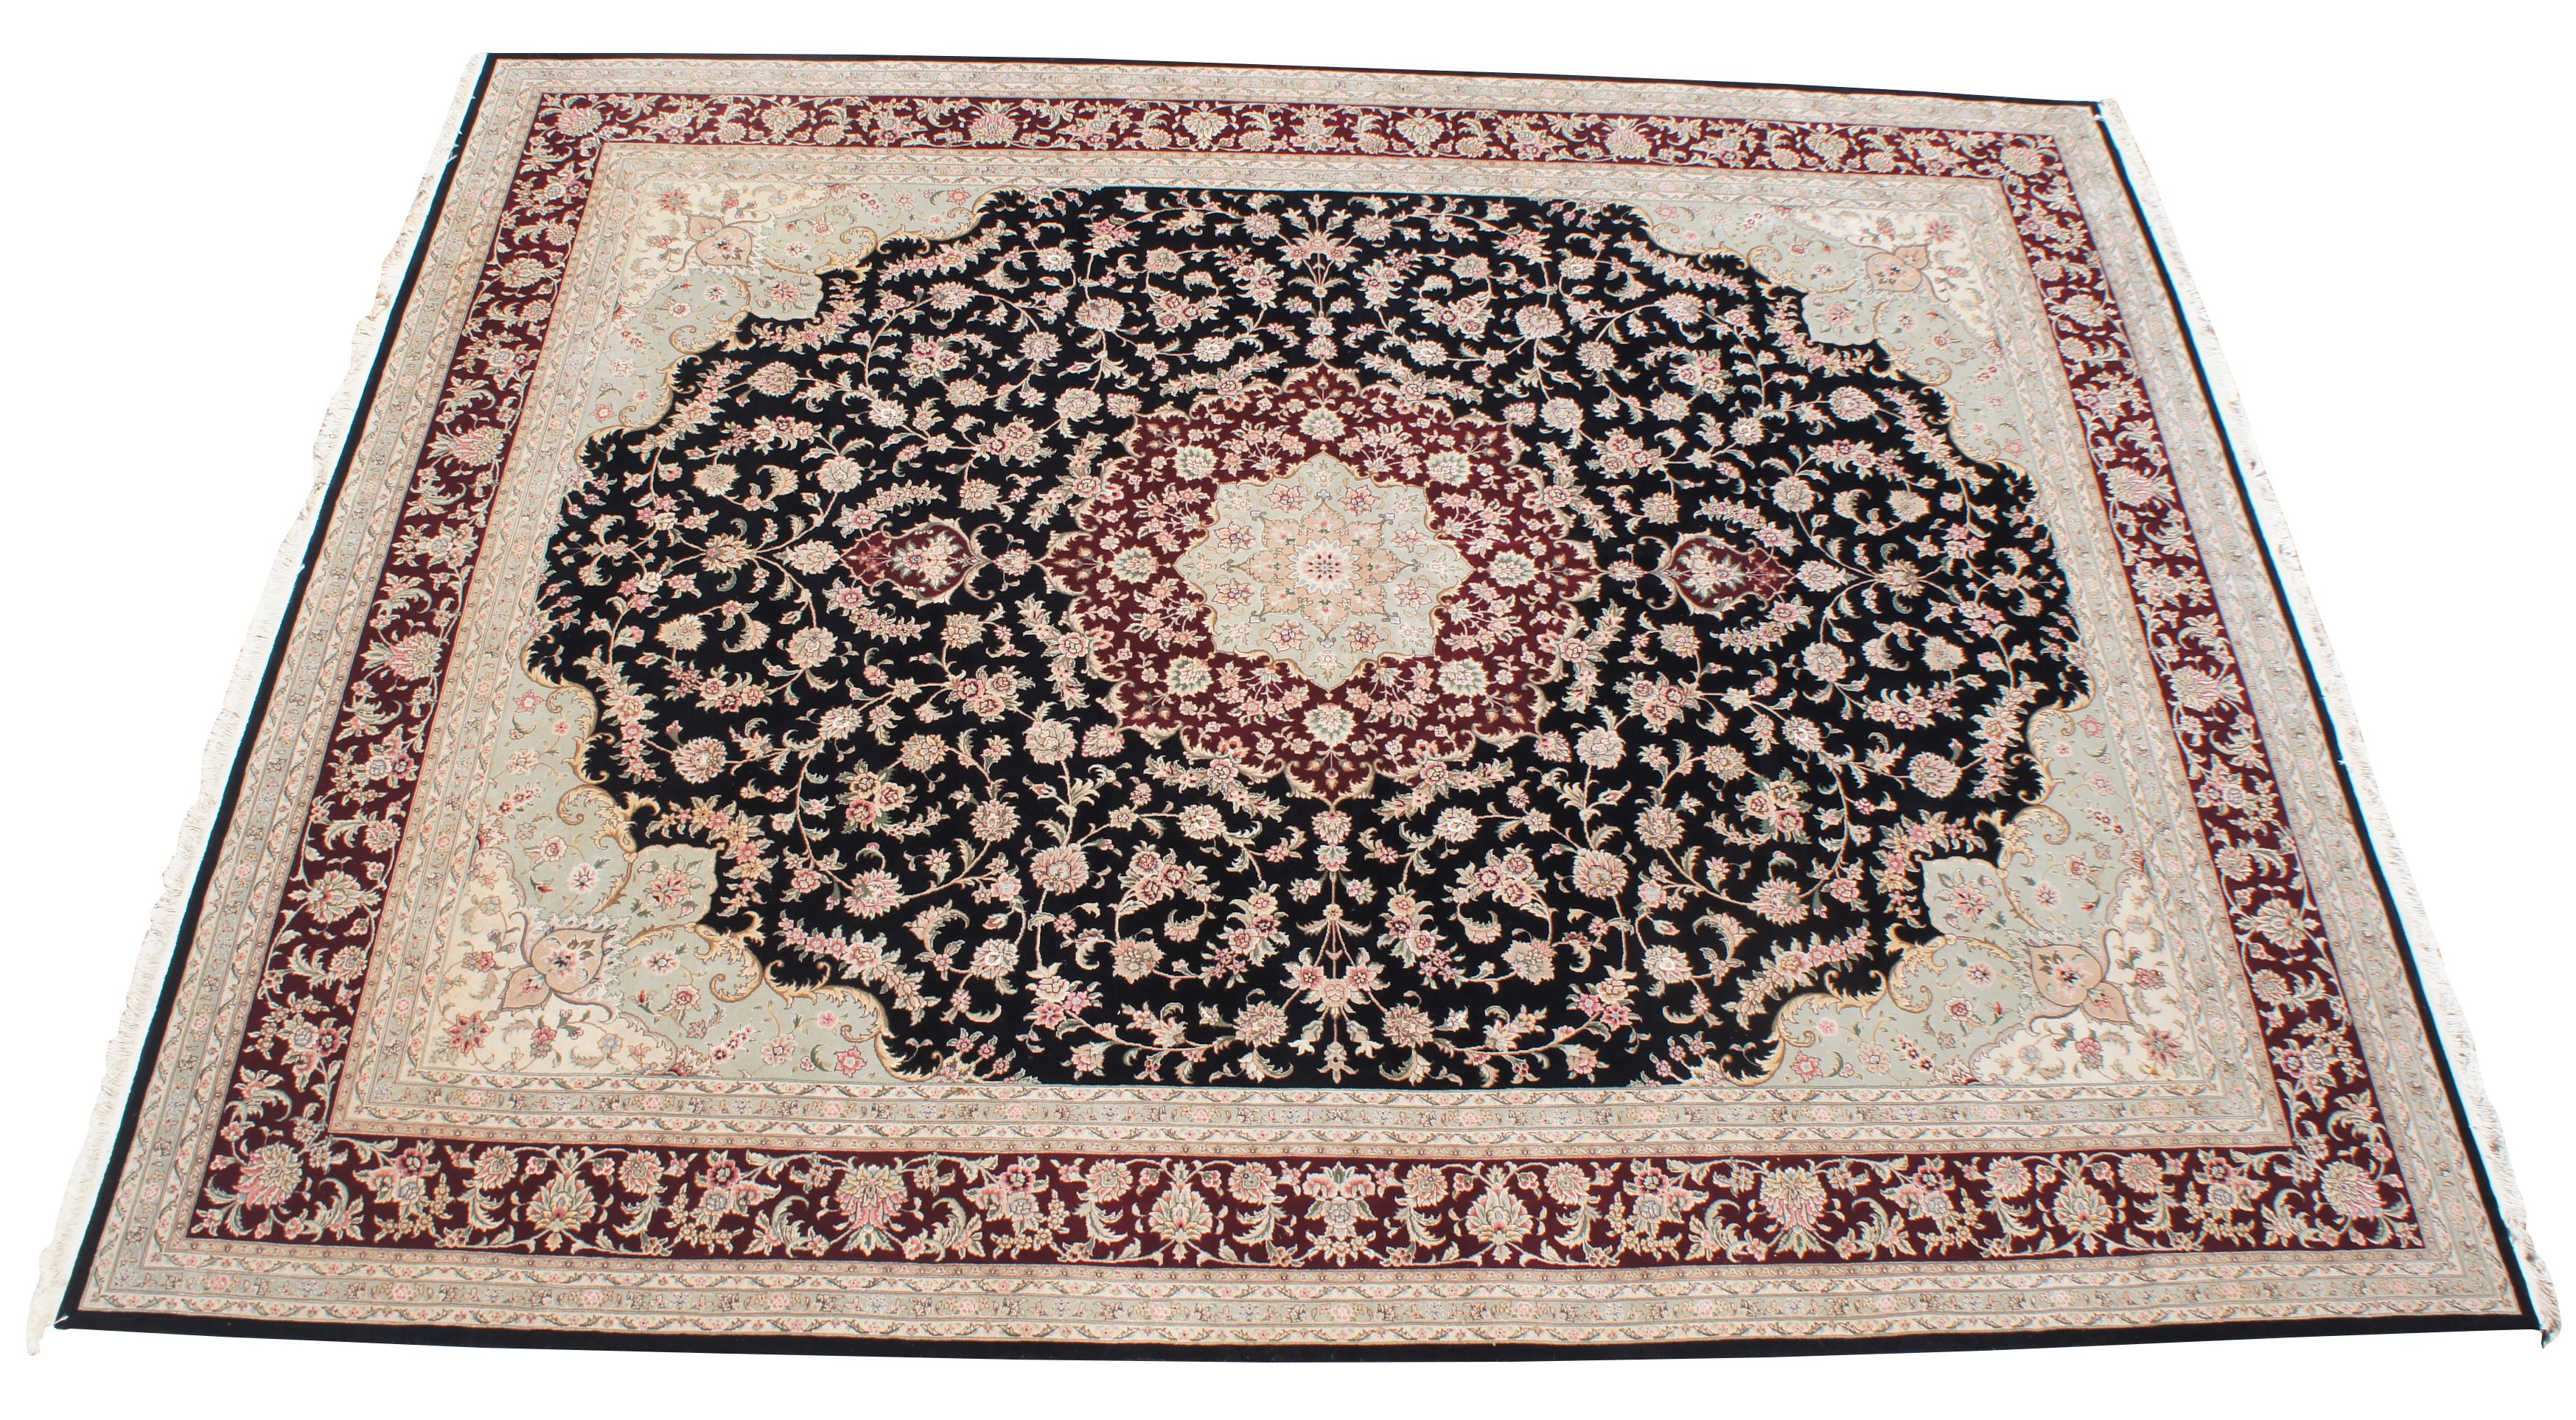 Beautiful large 12' x 15.5' Sino-Persian floral medallion area rug. Features a field of black with tan boarders and florals with reds, burgundy / maroon, green / olive, pinks and tans. Measures: 12' x 16'.
   